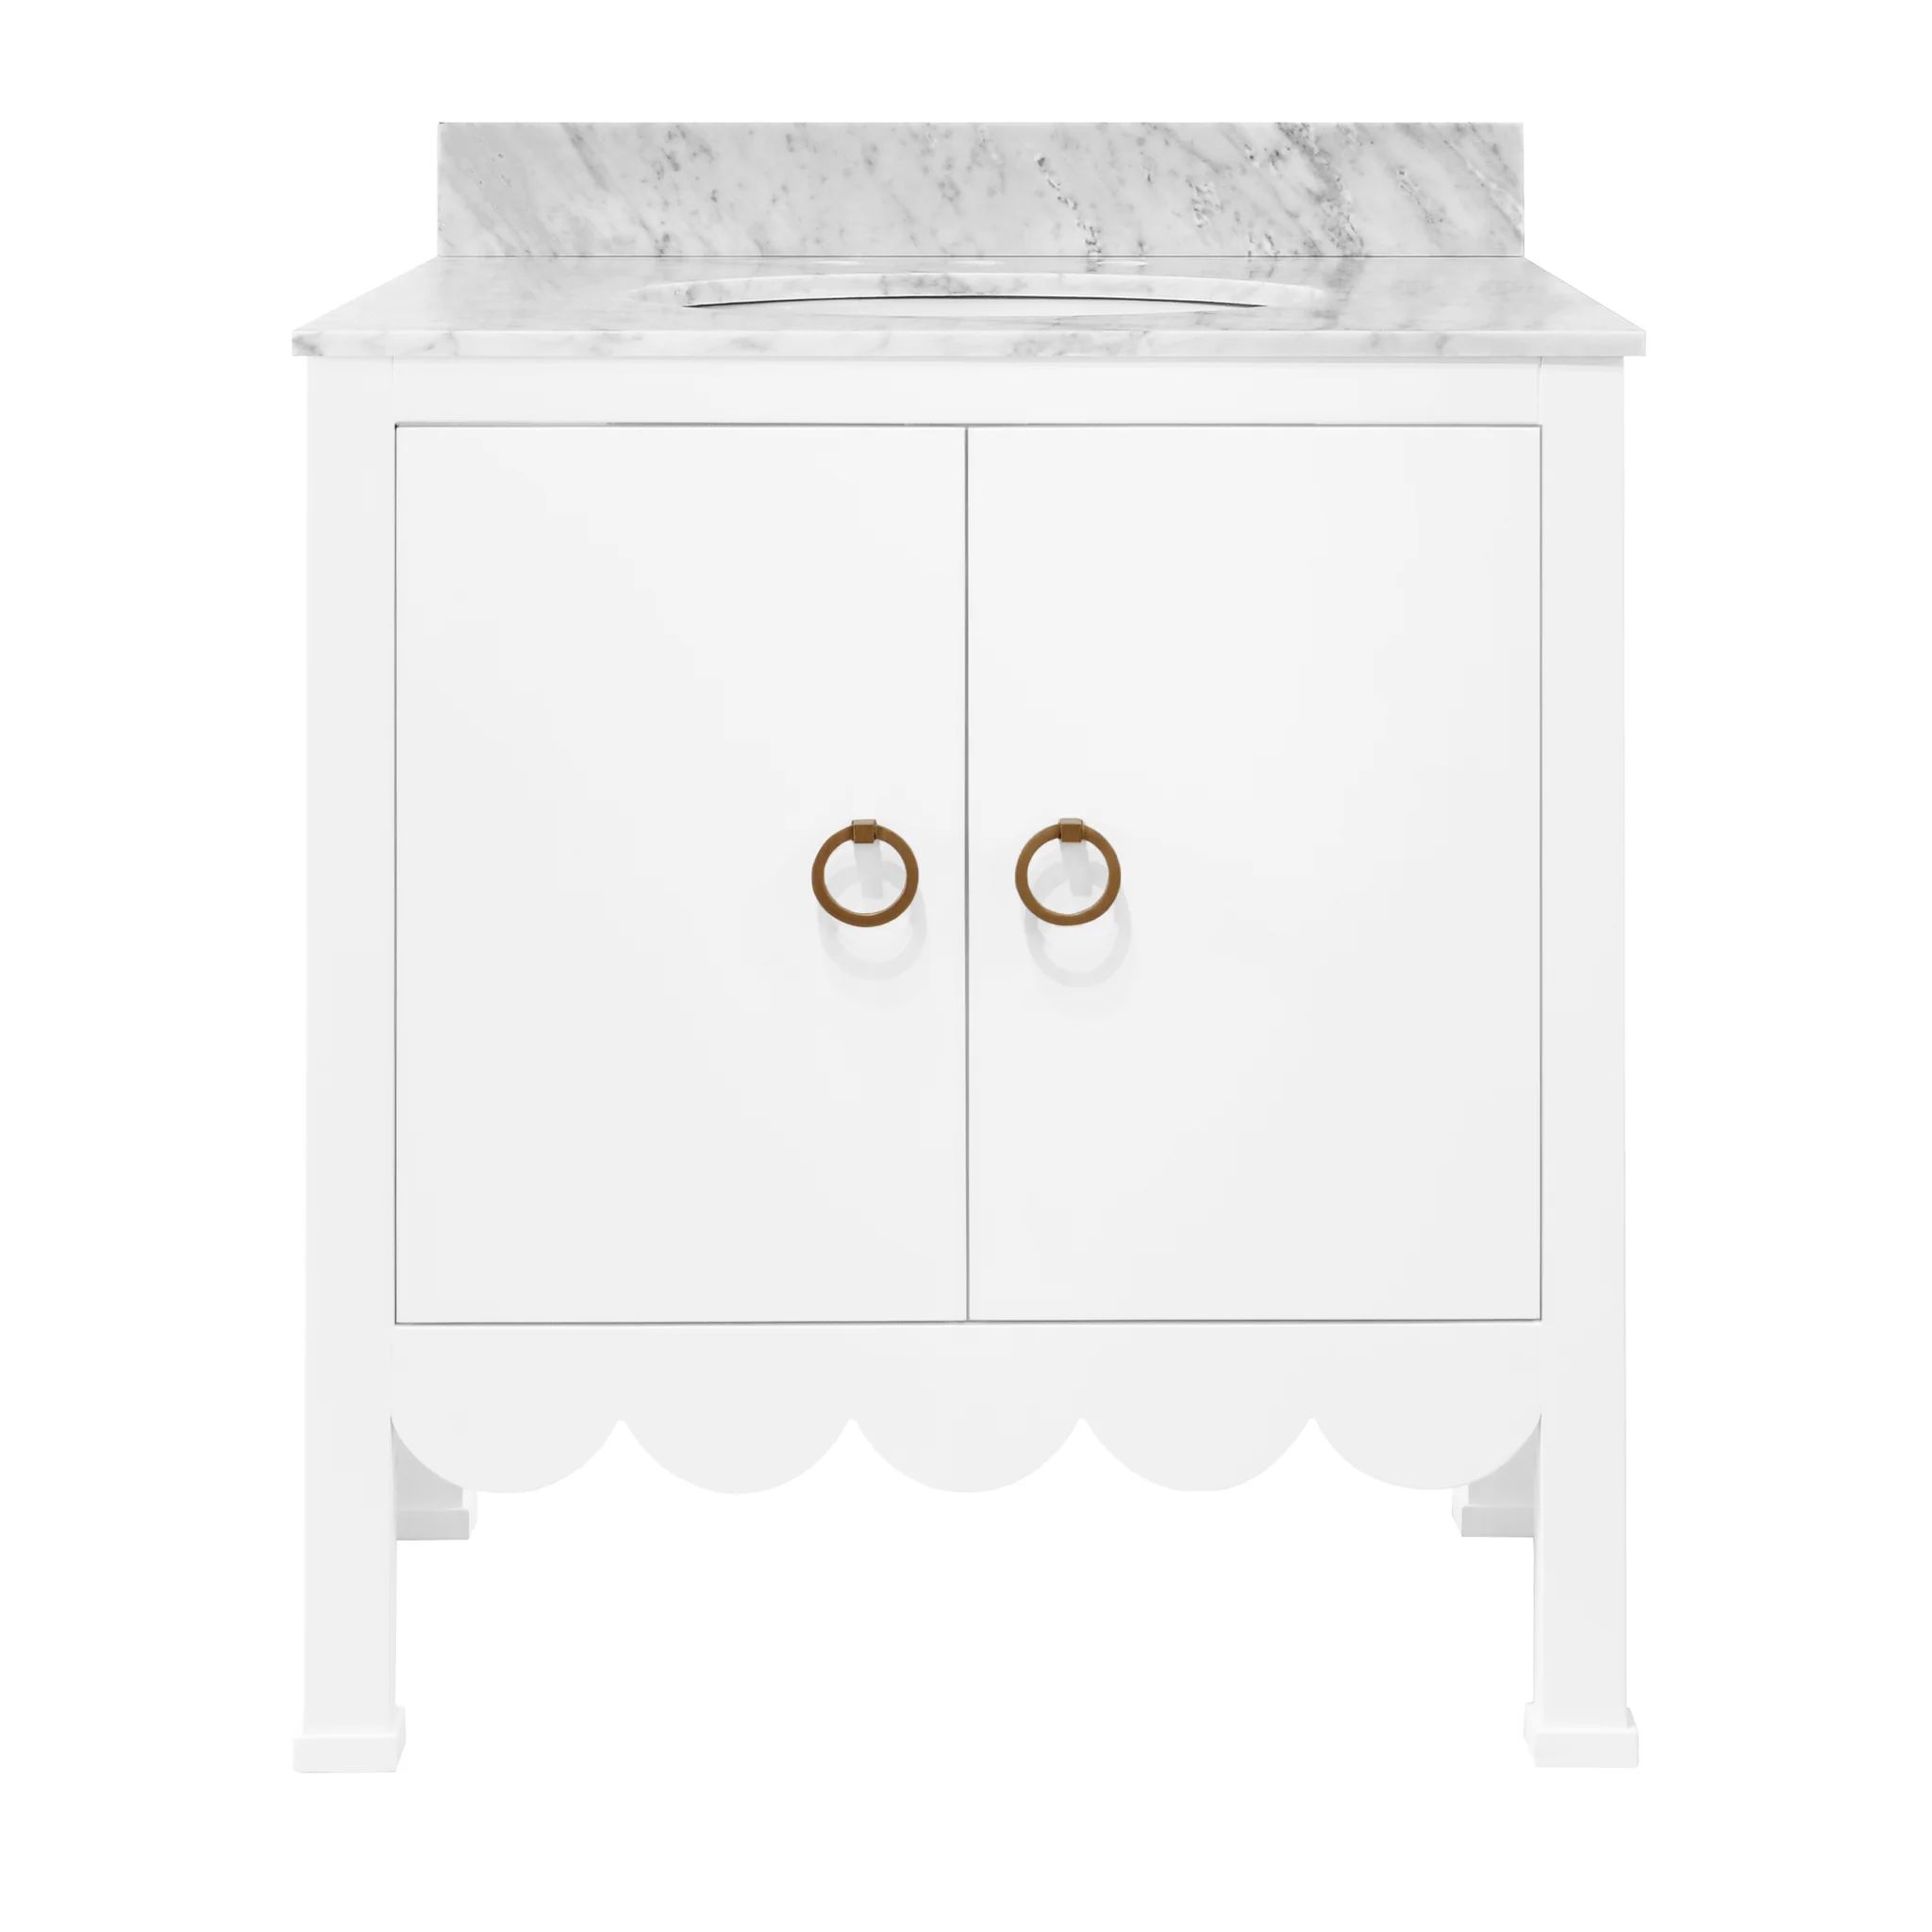 Kealey Vanity | The Well Appointed House, LLC